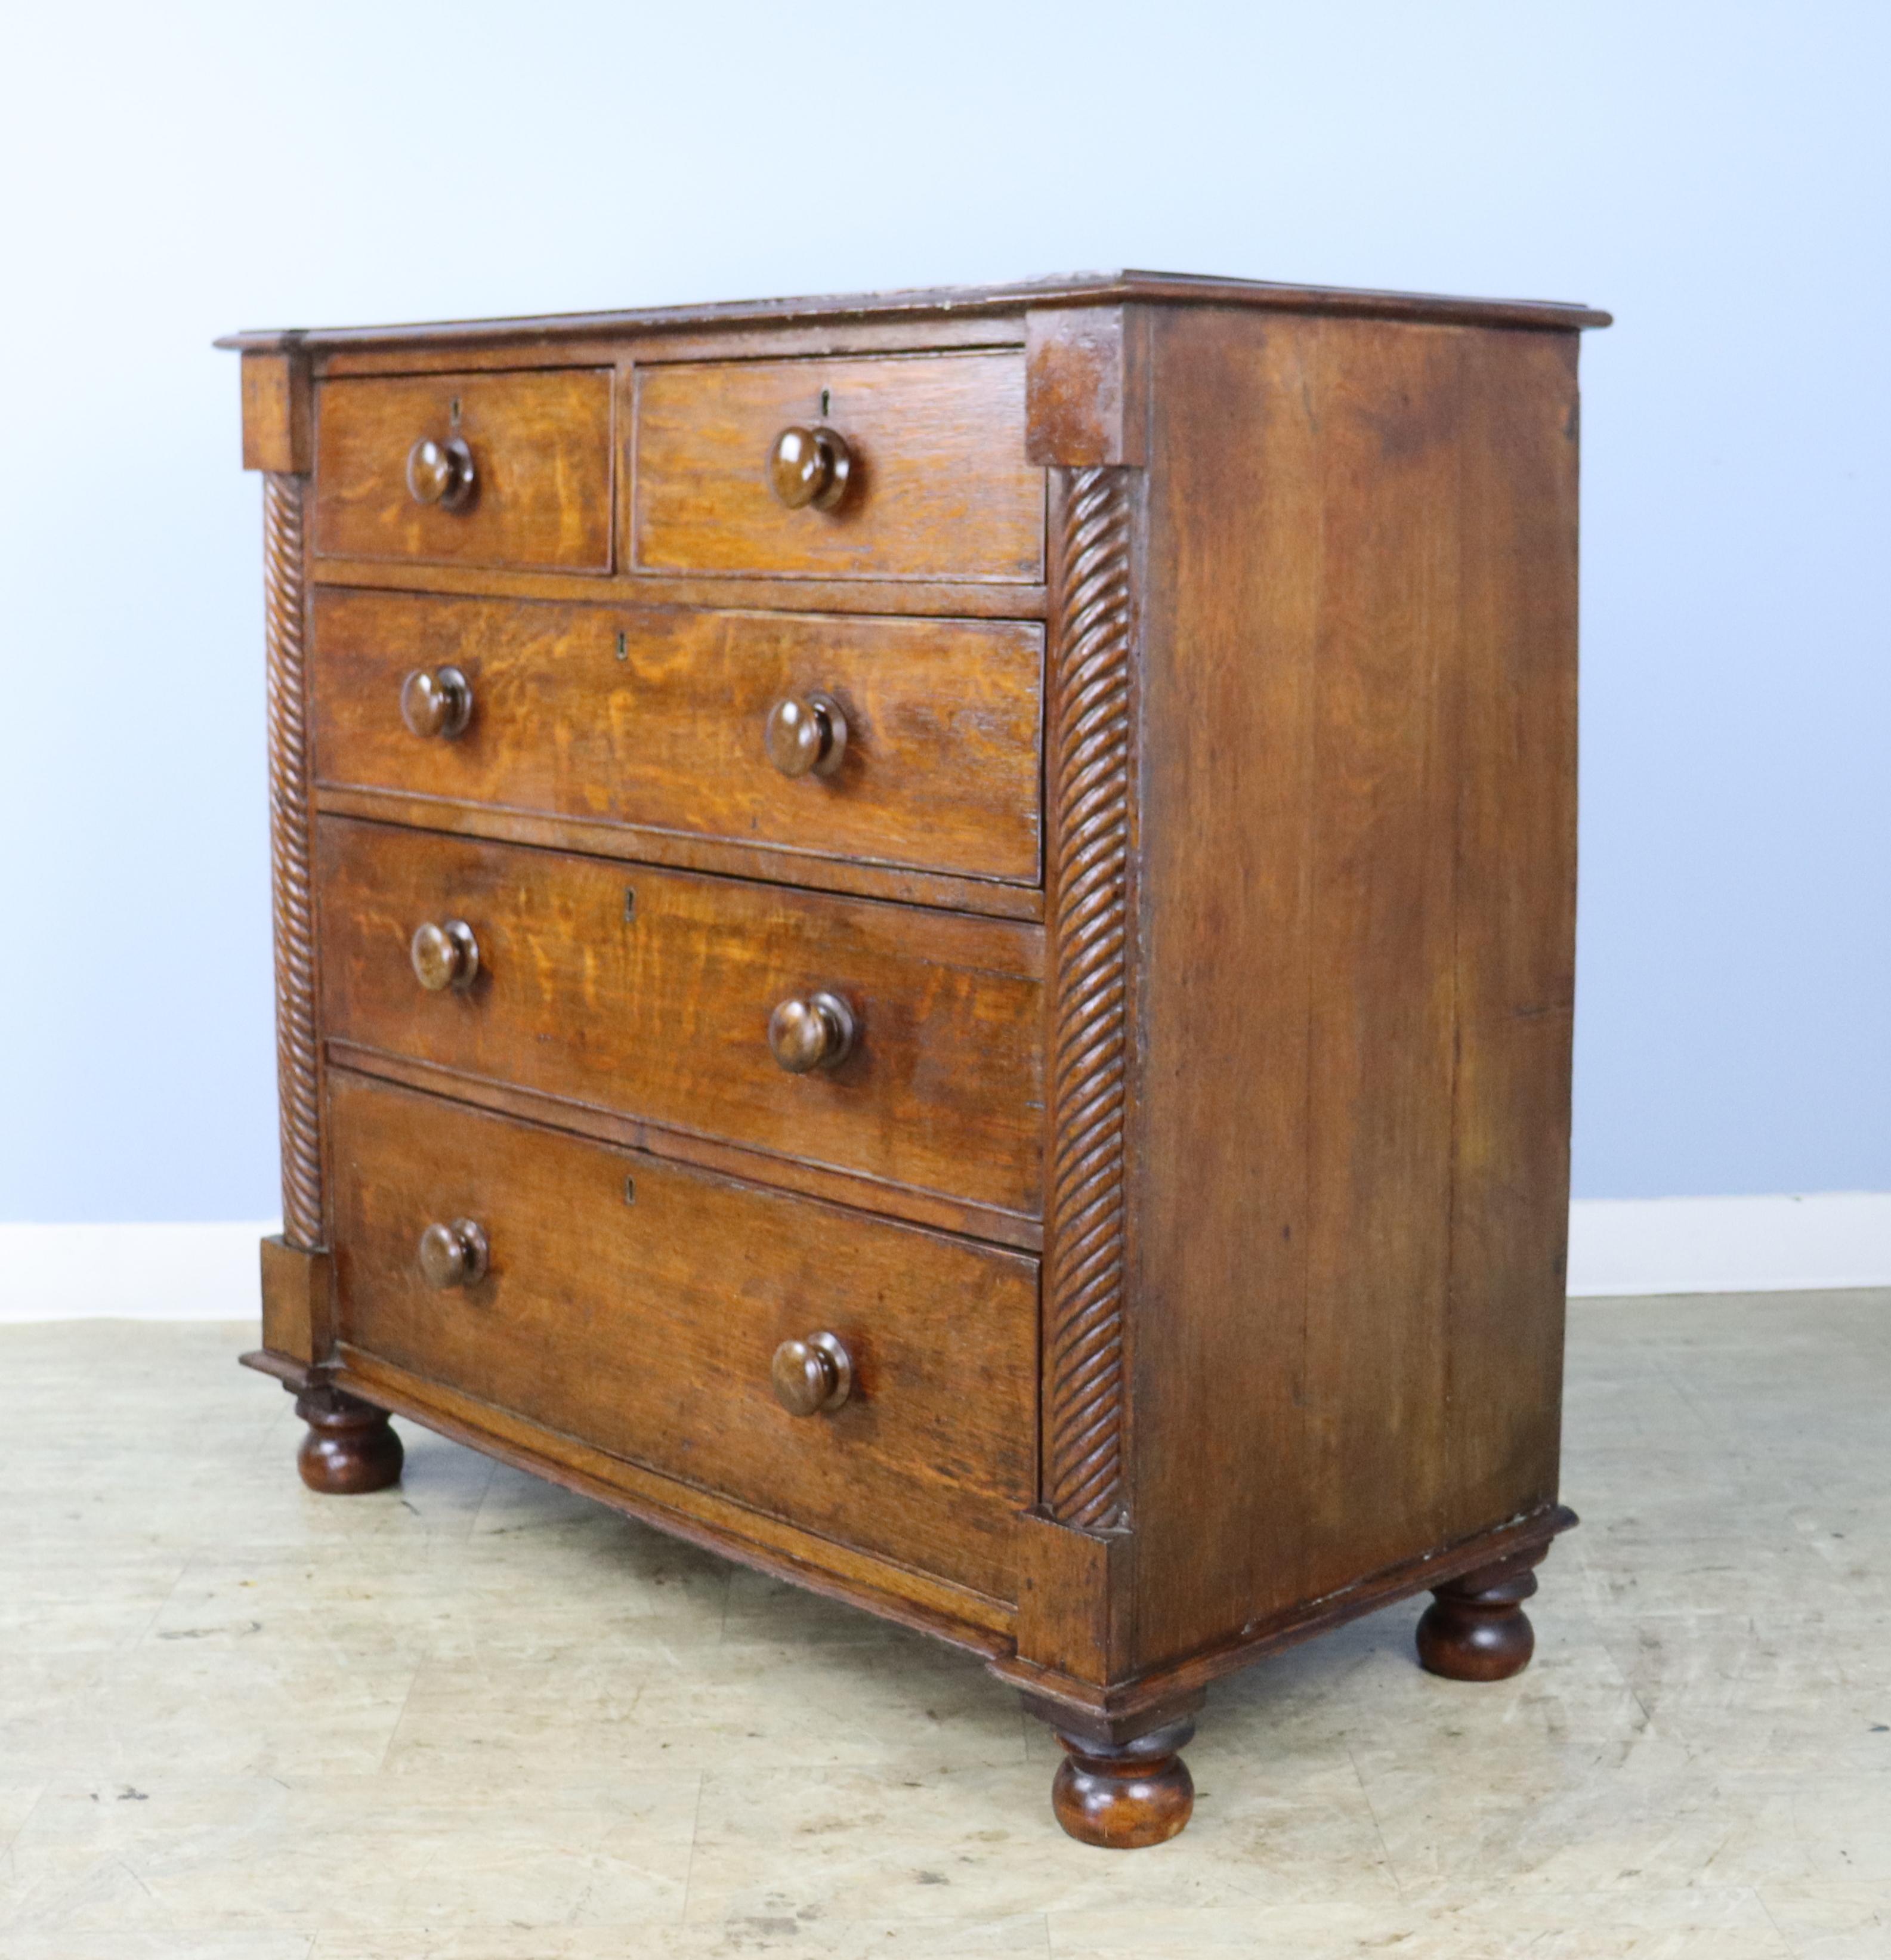 19th Century Welsh Oak Chest of Drawers with Twist Columns and Original Knobs For Sale